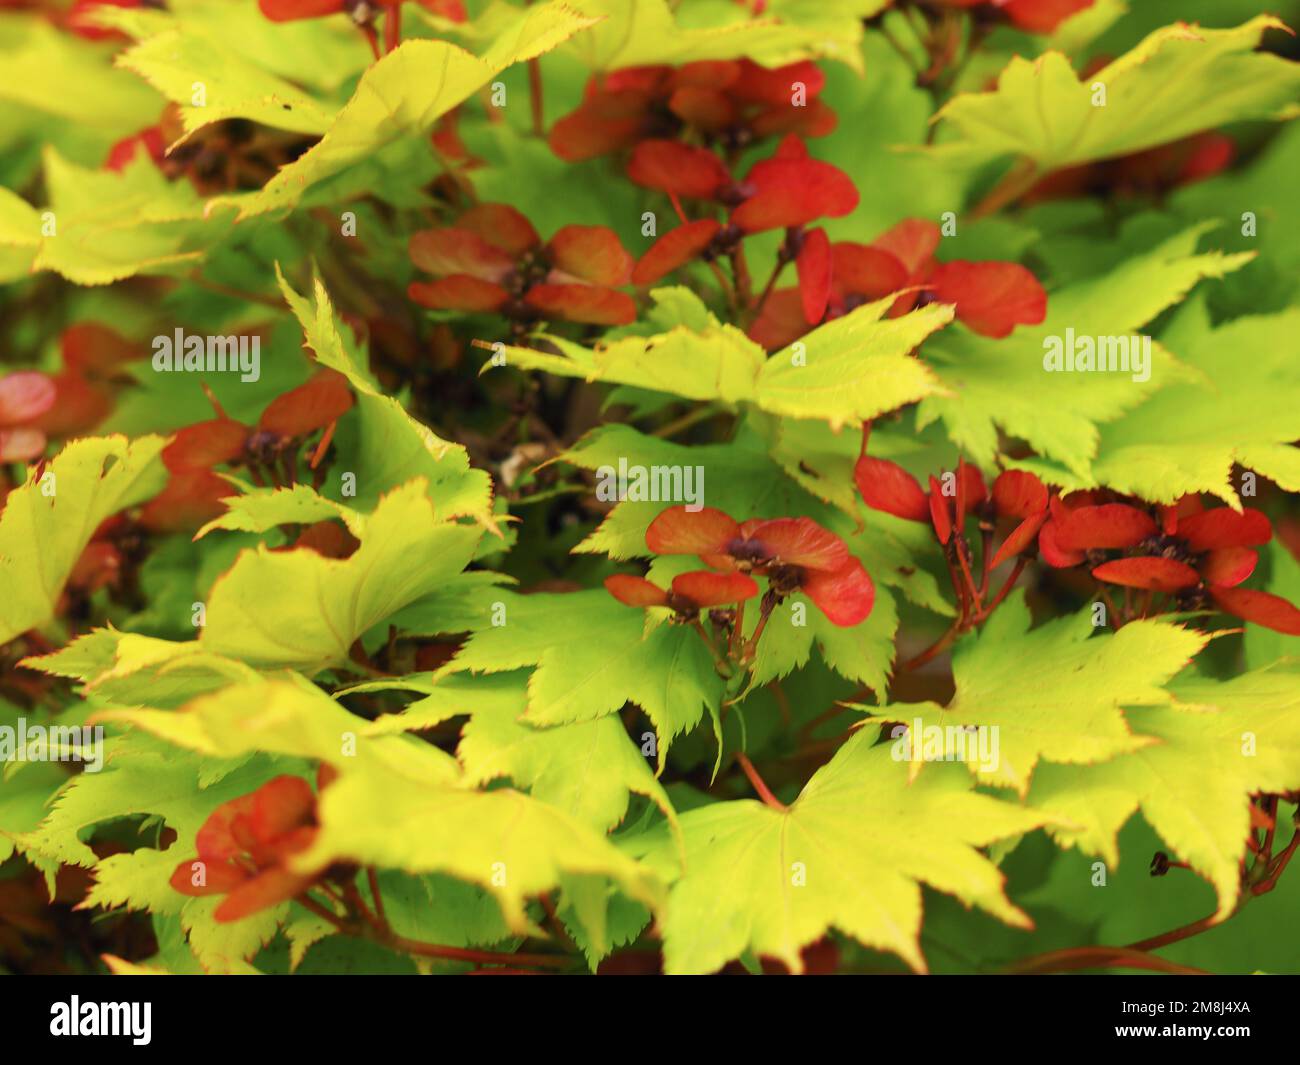 Leaves and flowers on a golden leaved Japanese maple shrub Stock Photo